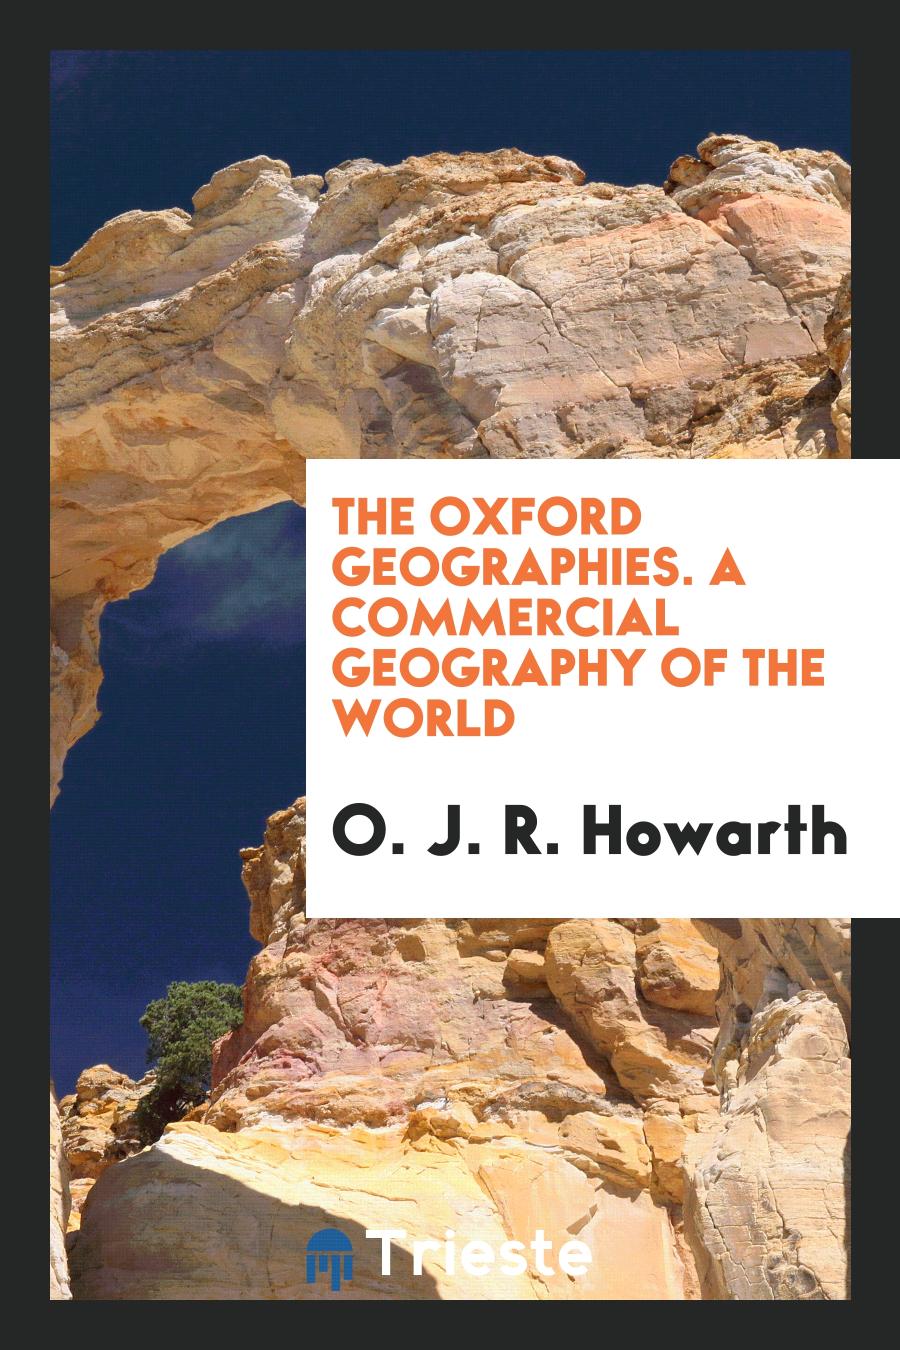 The Oxford Geographies. A Commercial Geography of the World